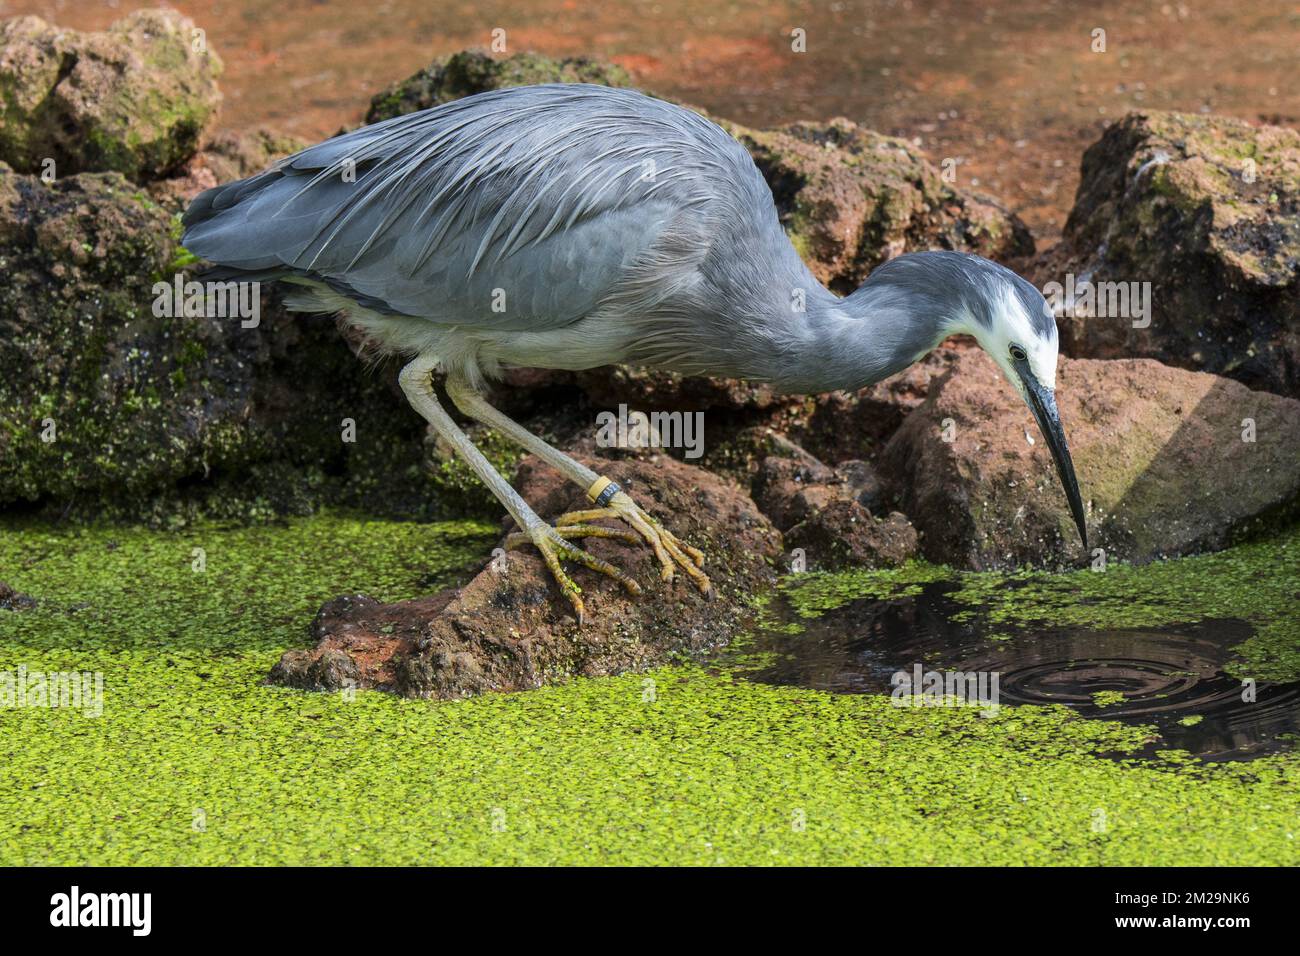 White-faced heron / white-fronted heron (Egretta novaehollandiae) fishing in pond, native to New Zealand and Australia | Aigrette à face blanche / Aigrette australienne (Egretta novaehollandiae) de l'Australie 17/09/2017 Stock Photo